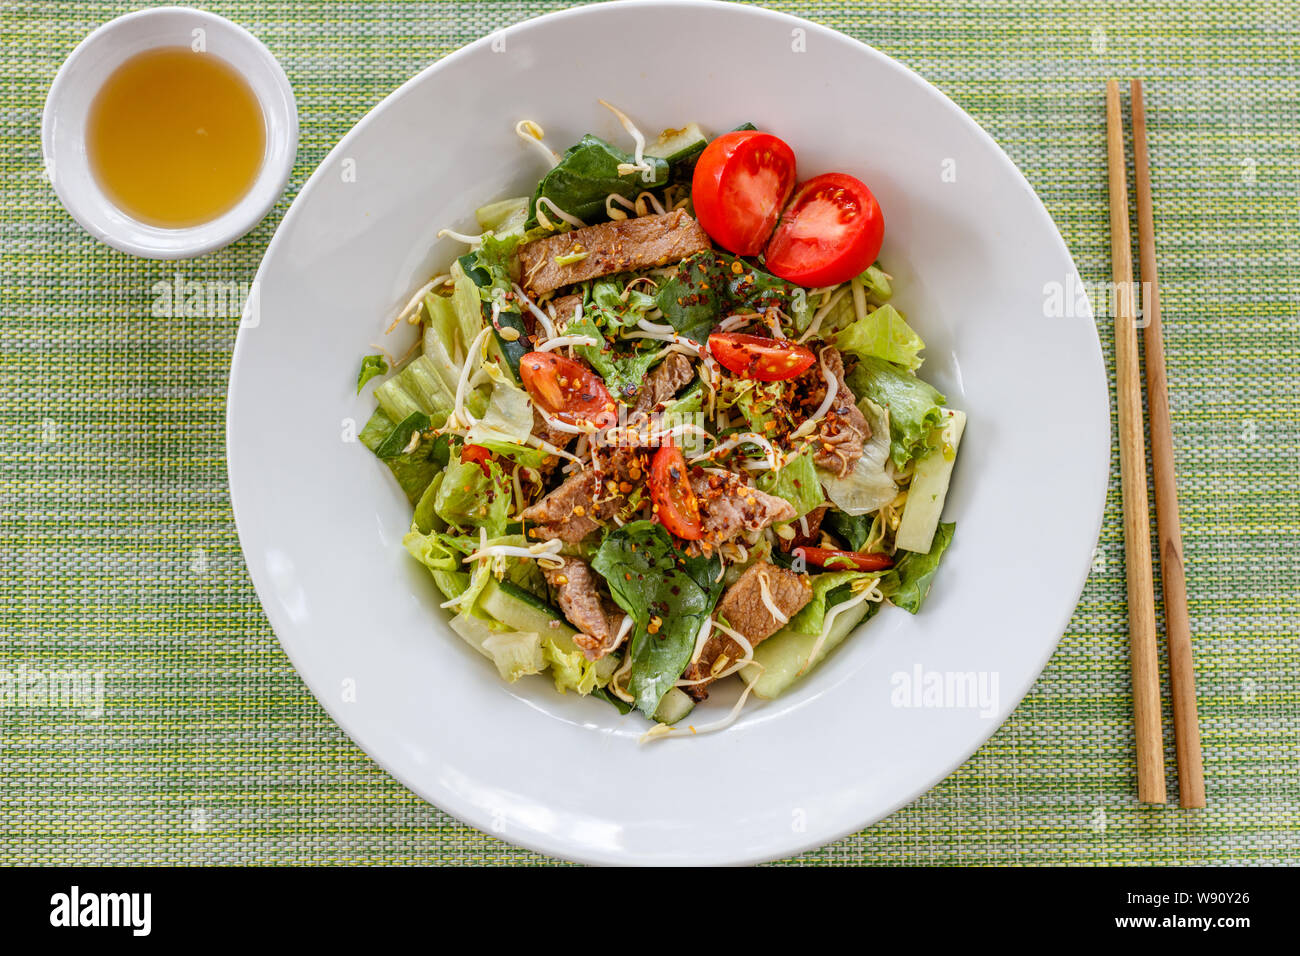 Yam Nuea Yang or Thai beef salad - traditional cuisine of Thailand. Sauce on the side. On green background. Stock Photo